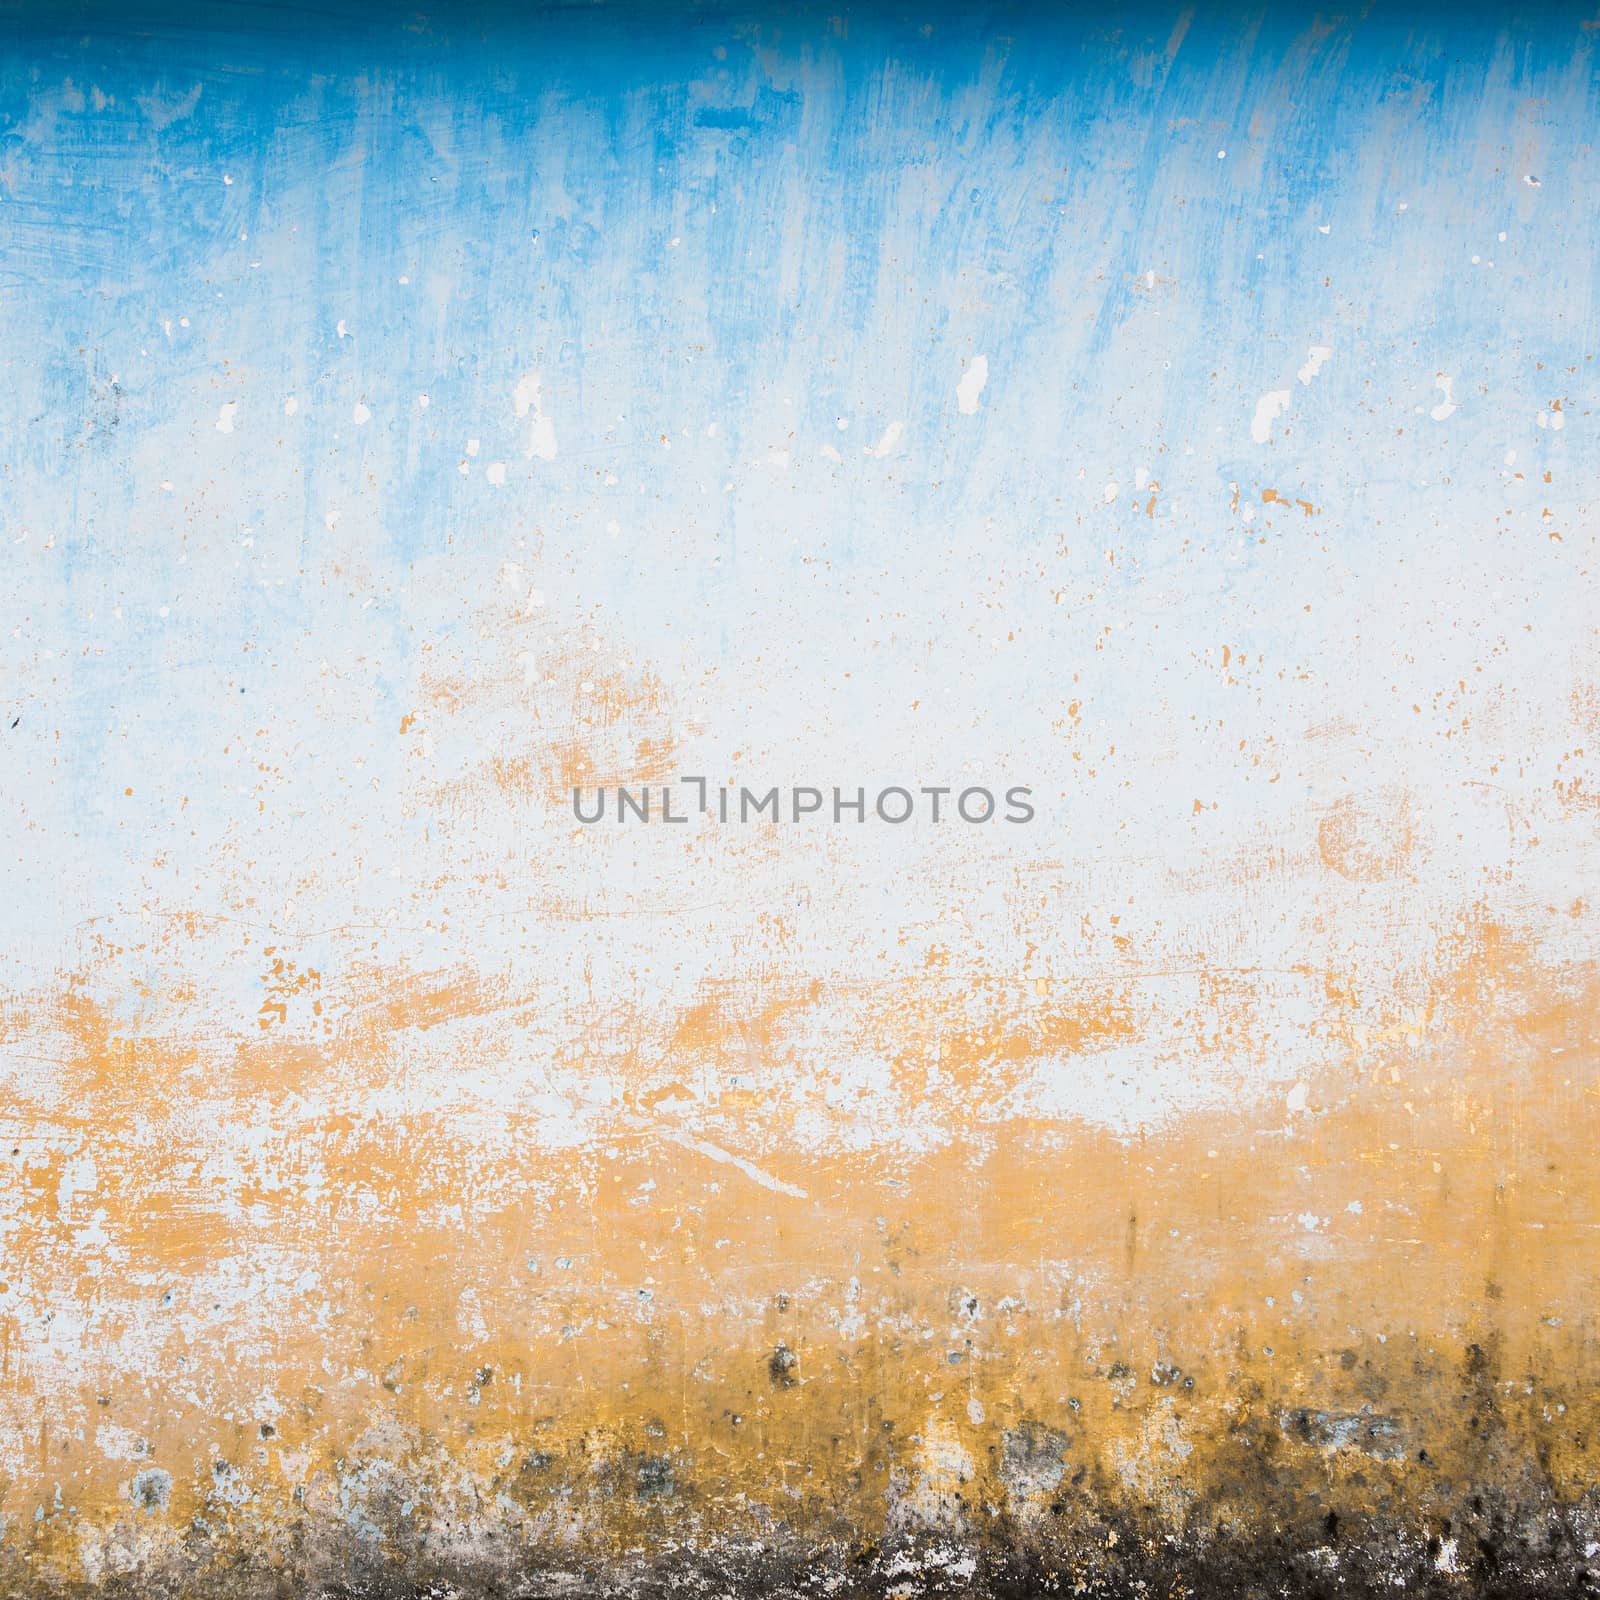 Dilapidated beige and blue wall texture, grungy background